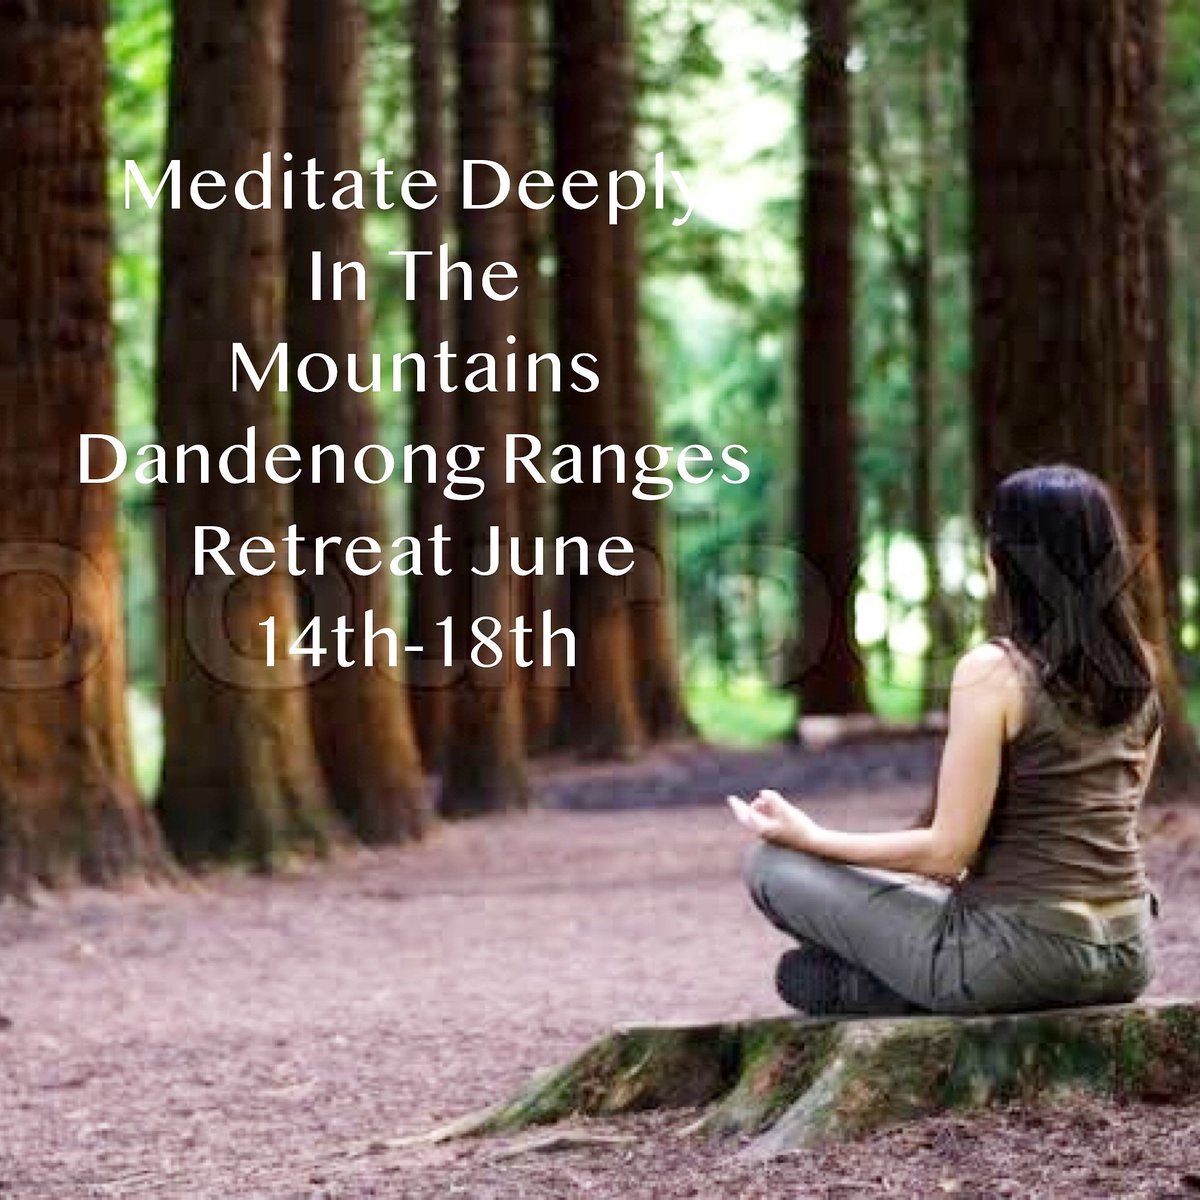 If you’re wanting to reset your mind and body then my 5 day retreat in the beautiful forests of Dandenong Ranges from June 14-18 will be a good choice. Details here tomcronin.com/meditation-ret…